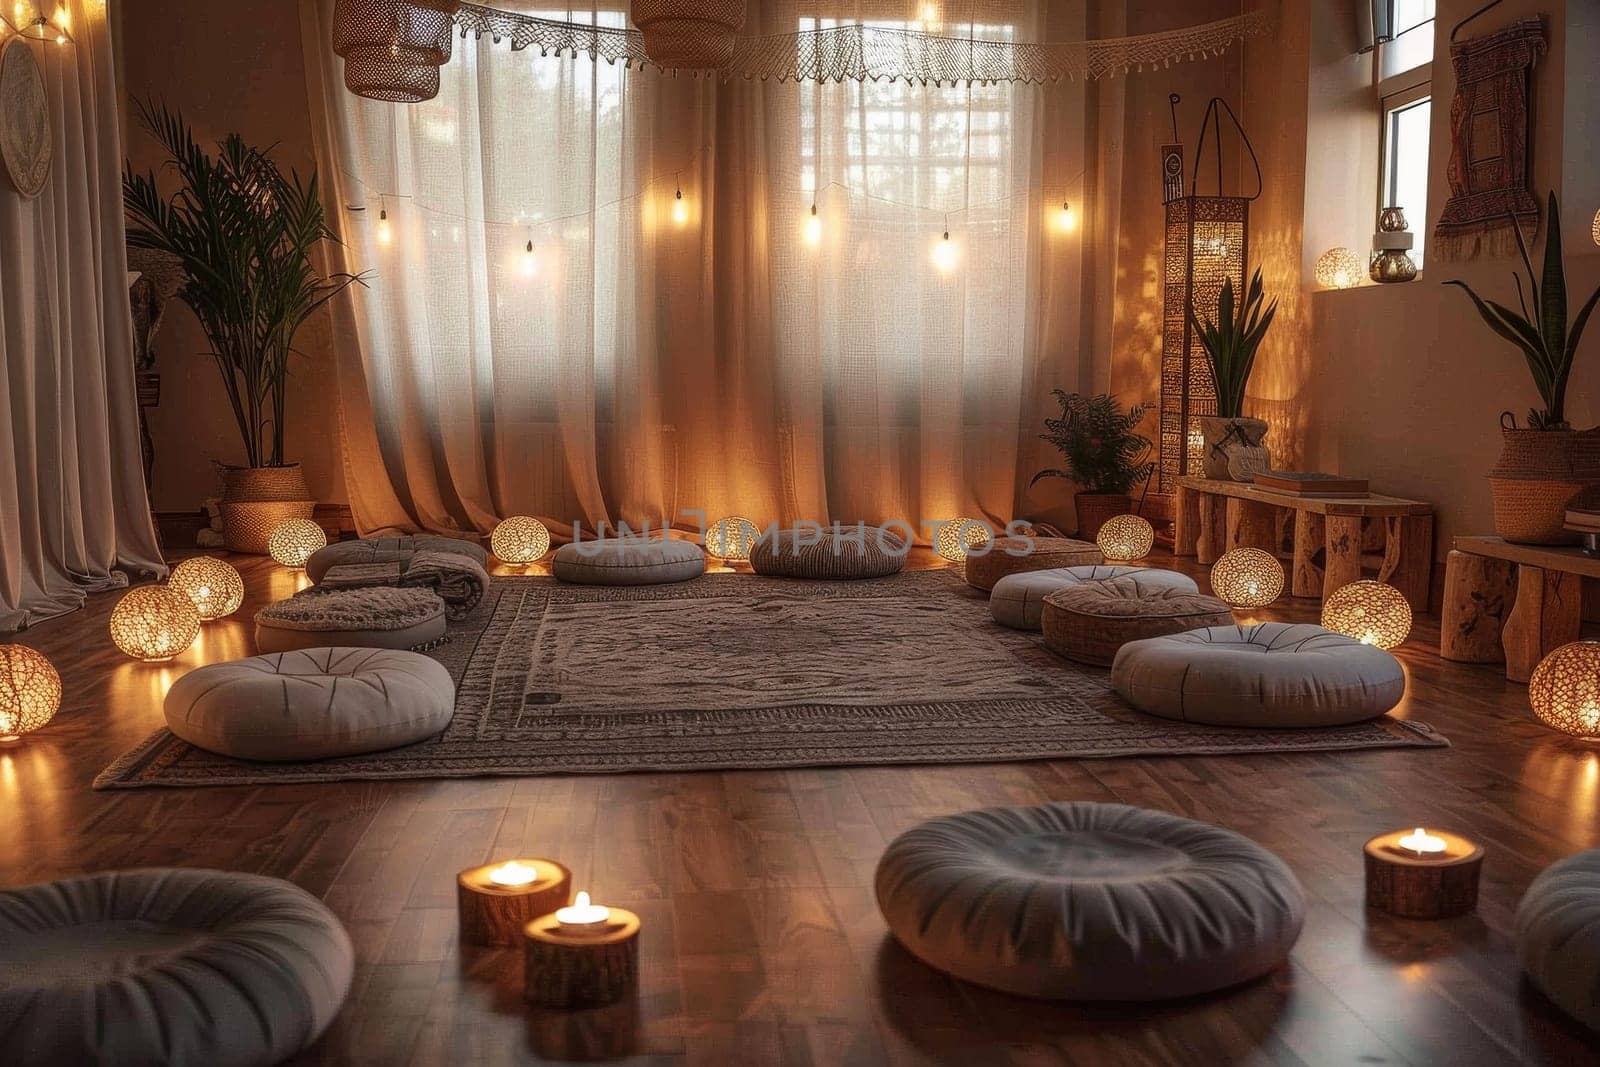 A room with a rug and pillows, lit with candles and lamps by itchaznong